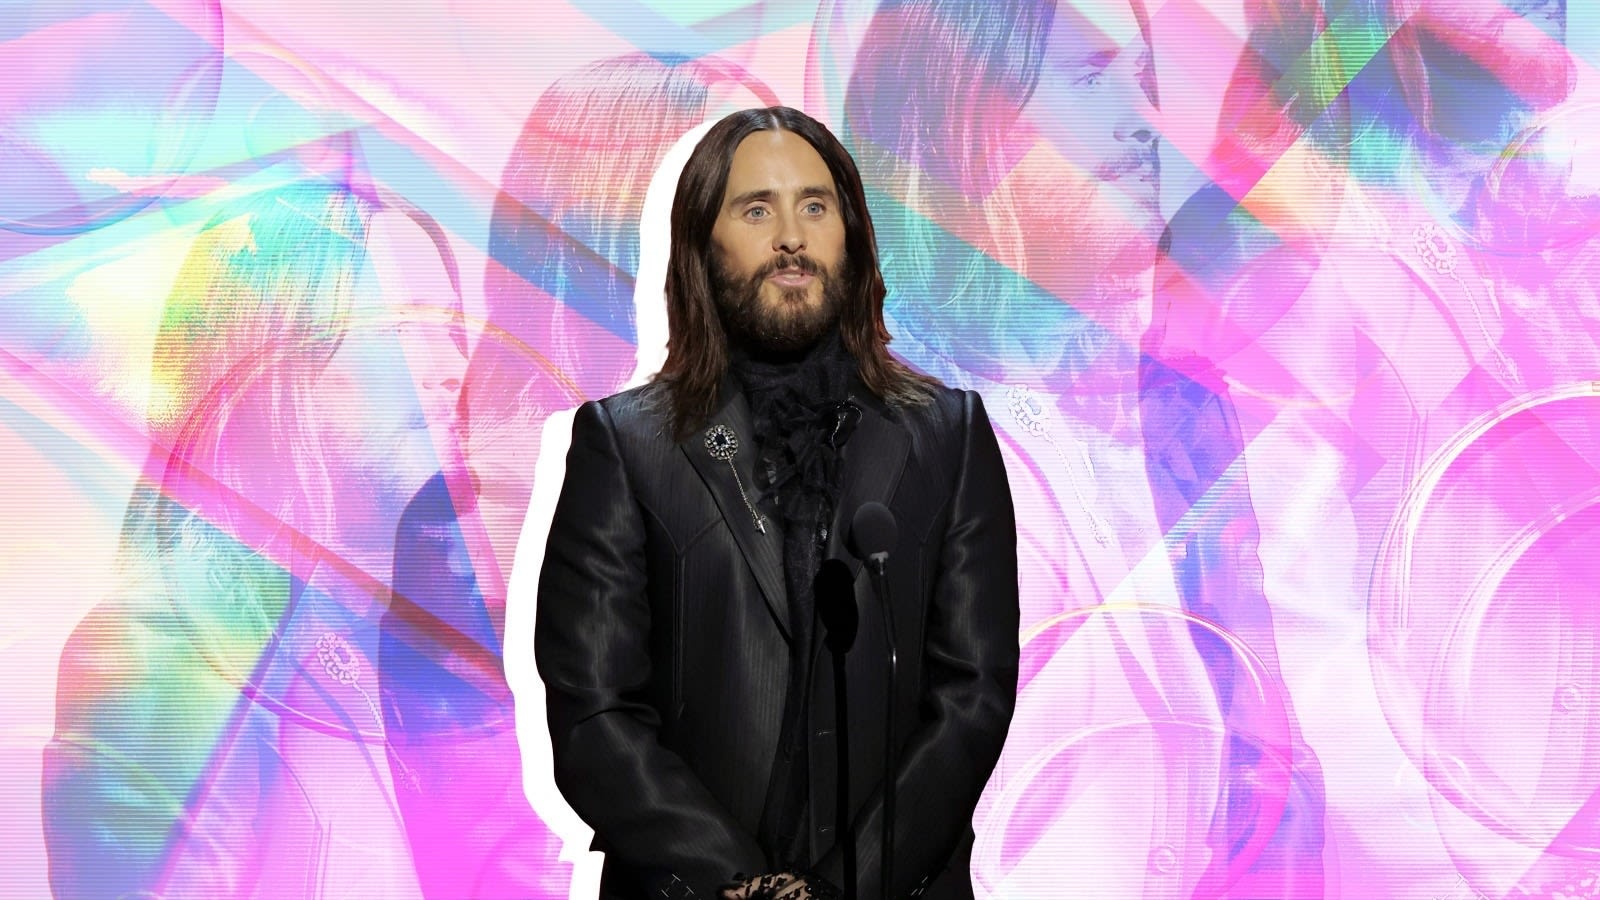 Jared Leto on 'emotional time travel' of singing Thirty Seconds to Mars hits on tour